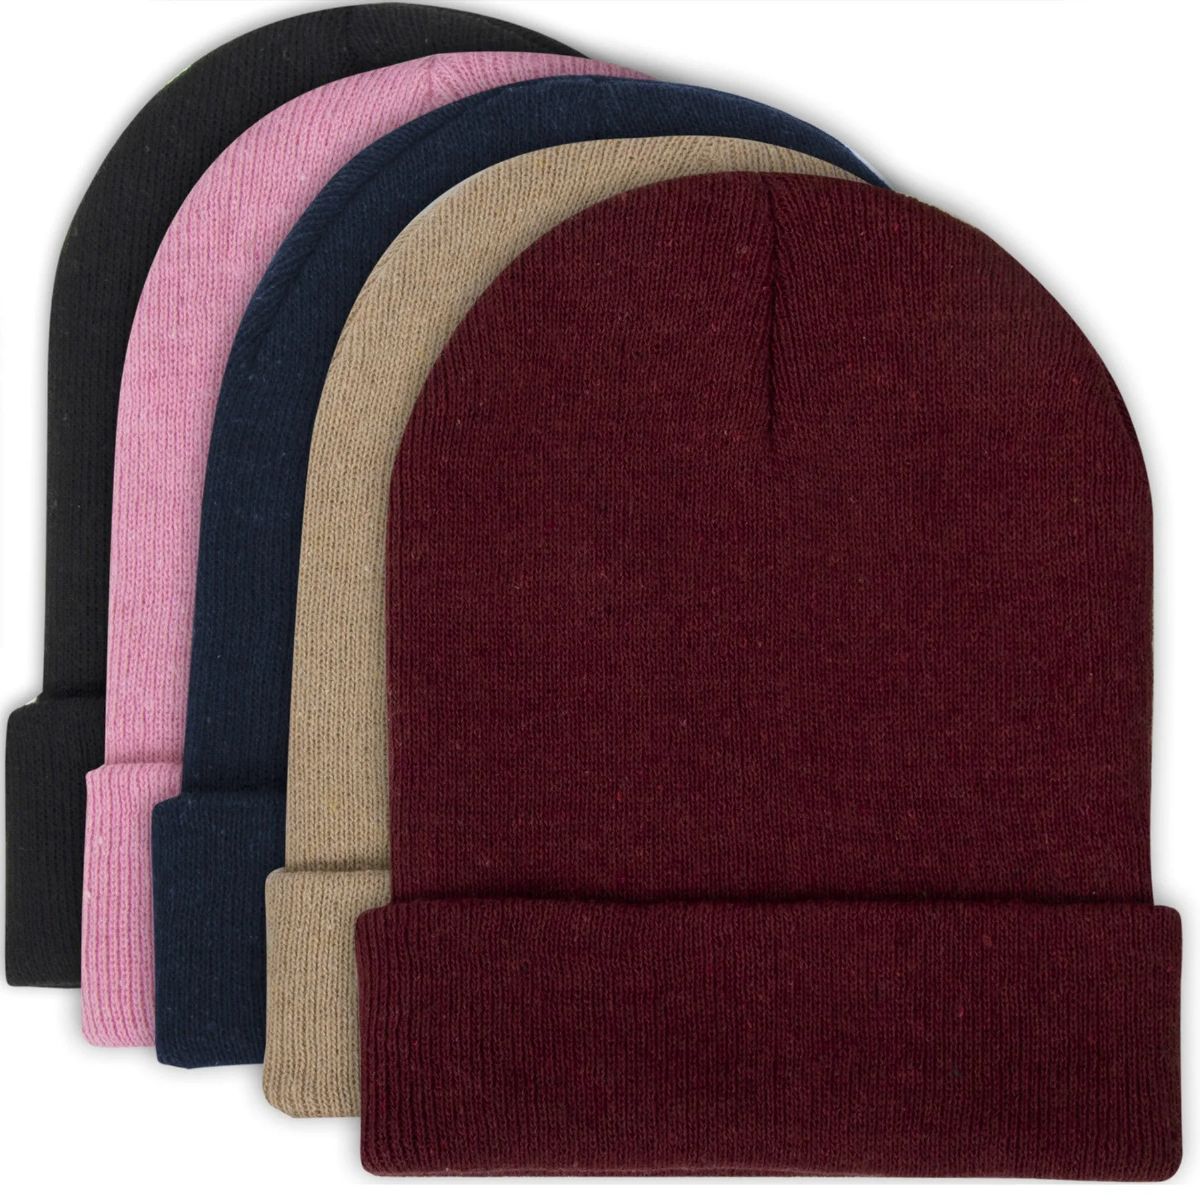 50 Pieces of Adult Winter Knit Beanie Hat